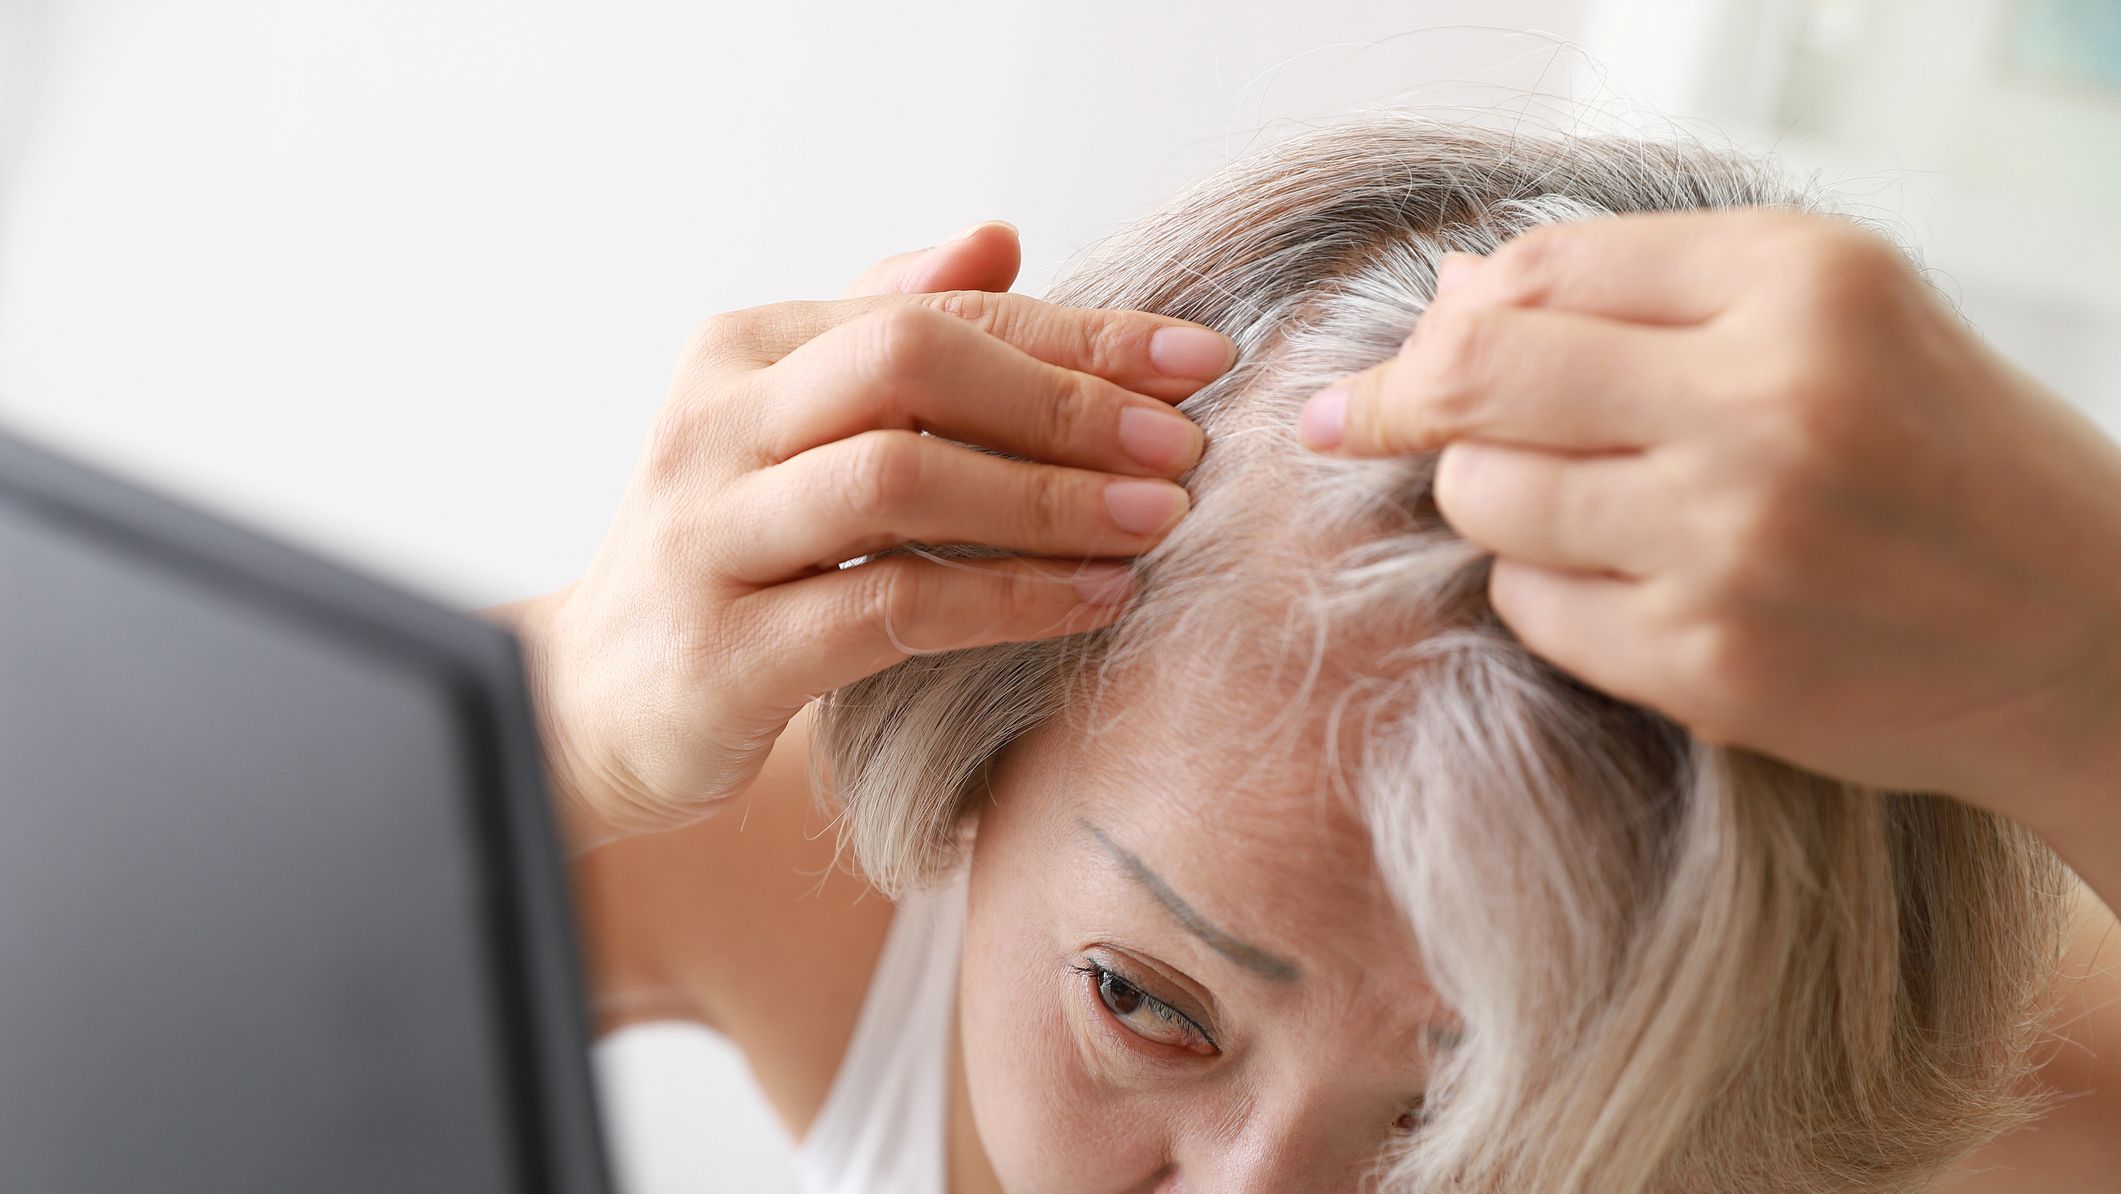 Nourish Your Scalp: Nutritious Food for Dandruff Or Sores